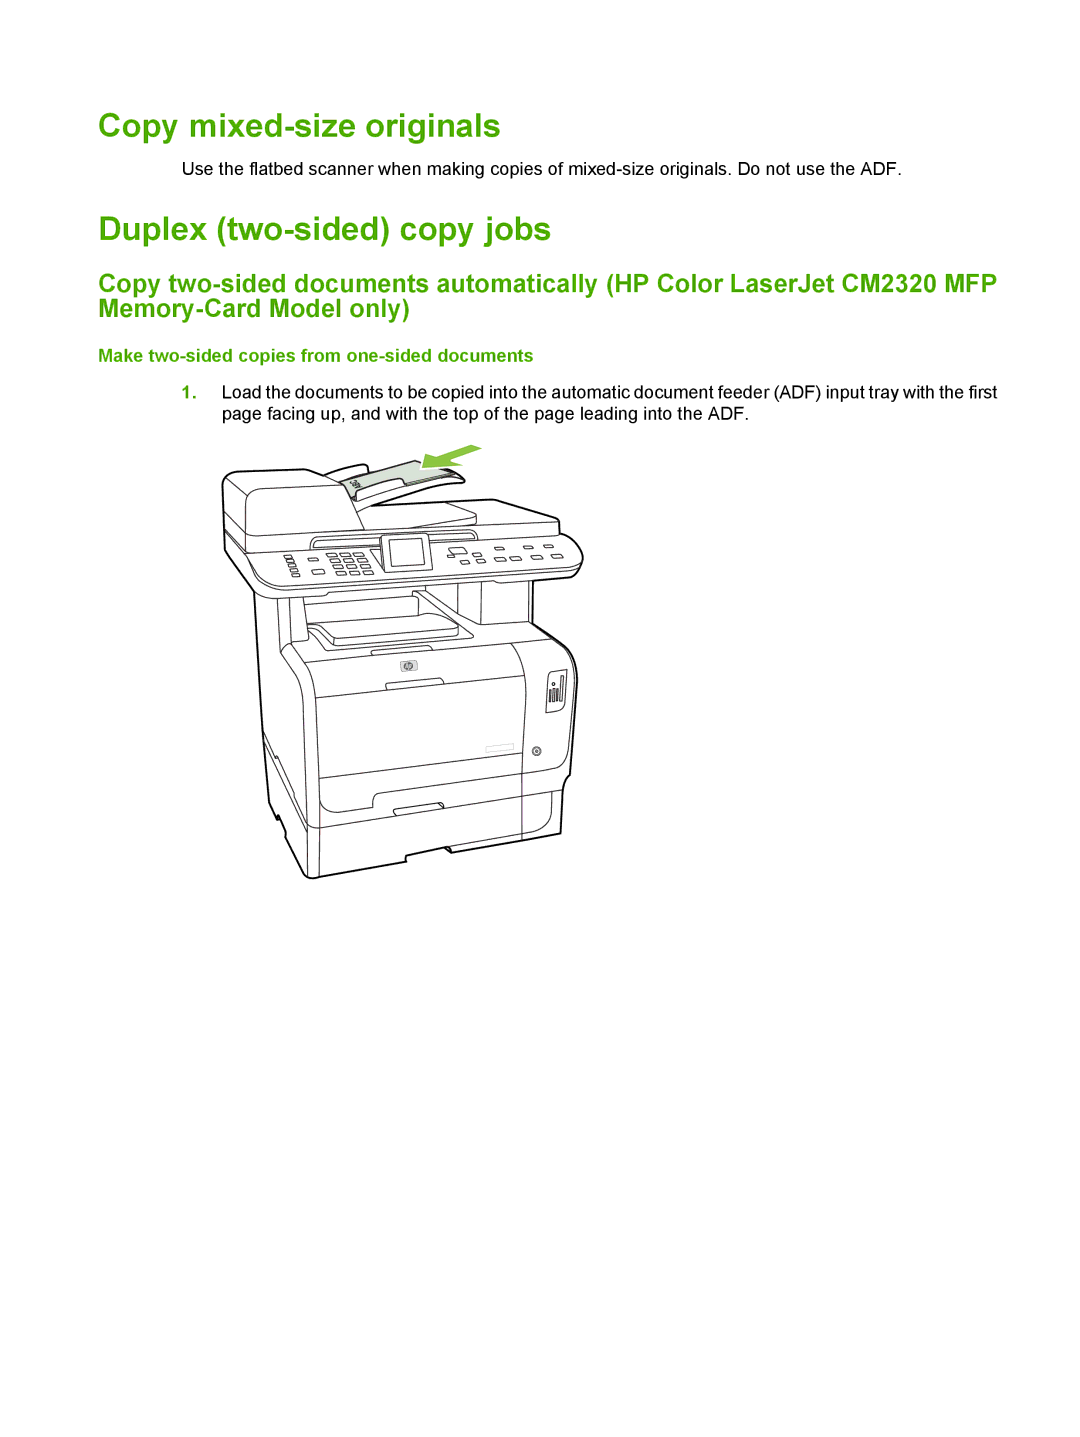 HP CM2320 manual Copy mixed-size originals, Duplex two-sided copy jobs, Make two-sided copies from one-sided documents 